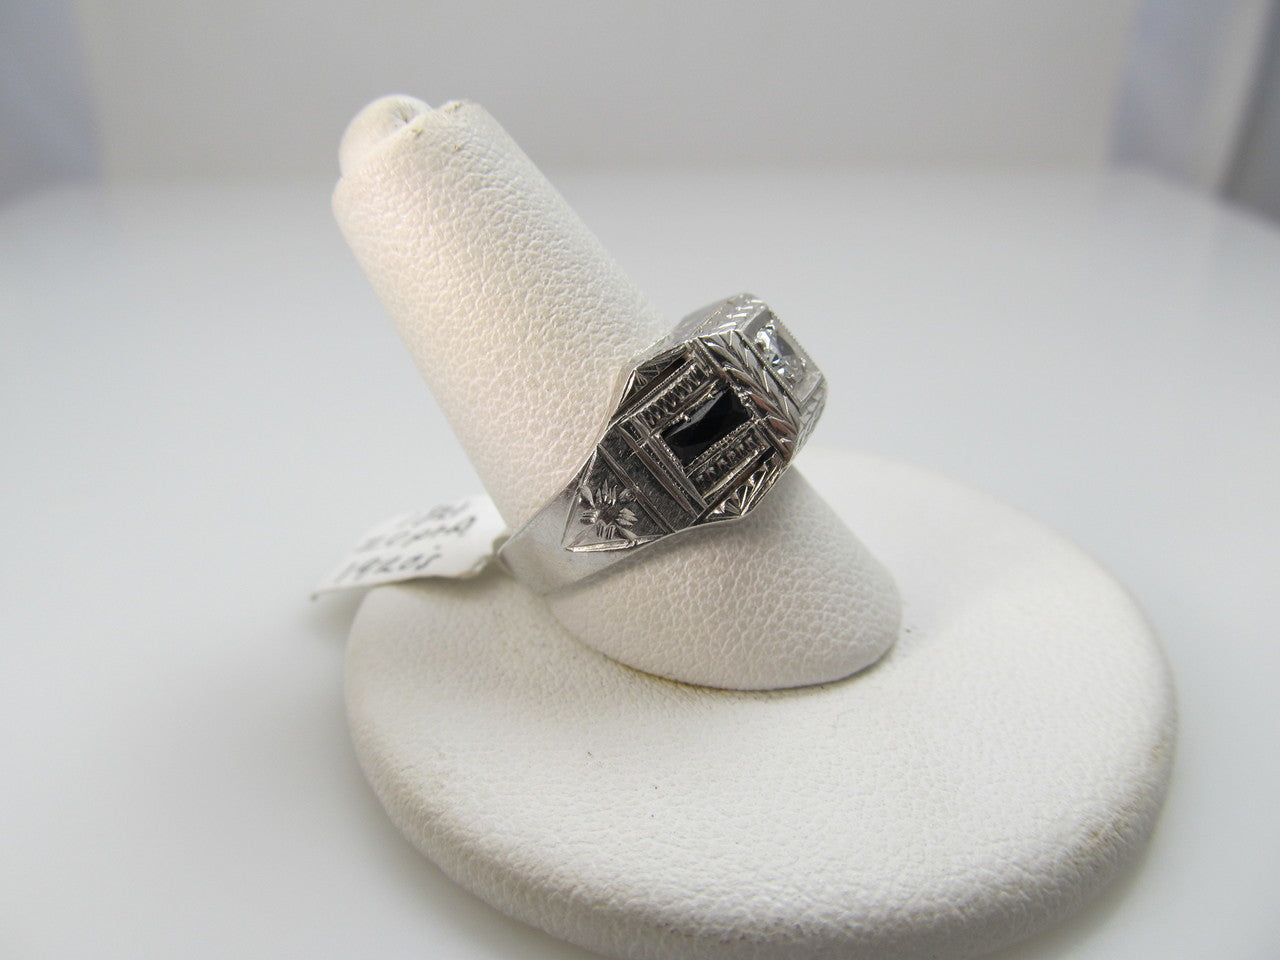 Vintage 18k White Gold Ring With A .20ct Diamond And Sapphires, Circa 1920